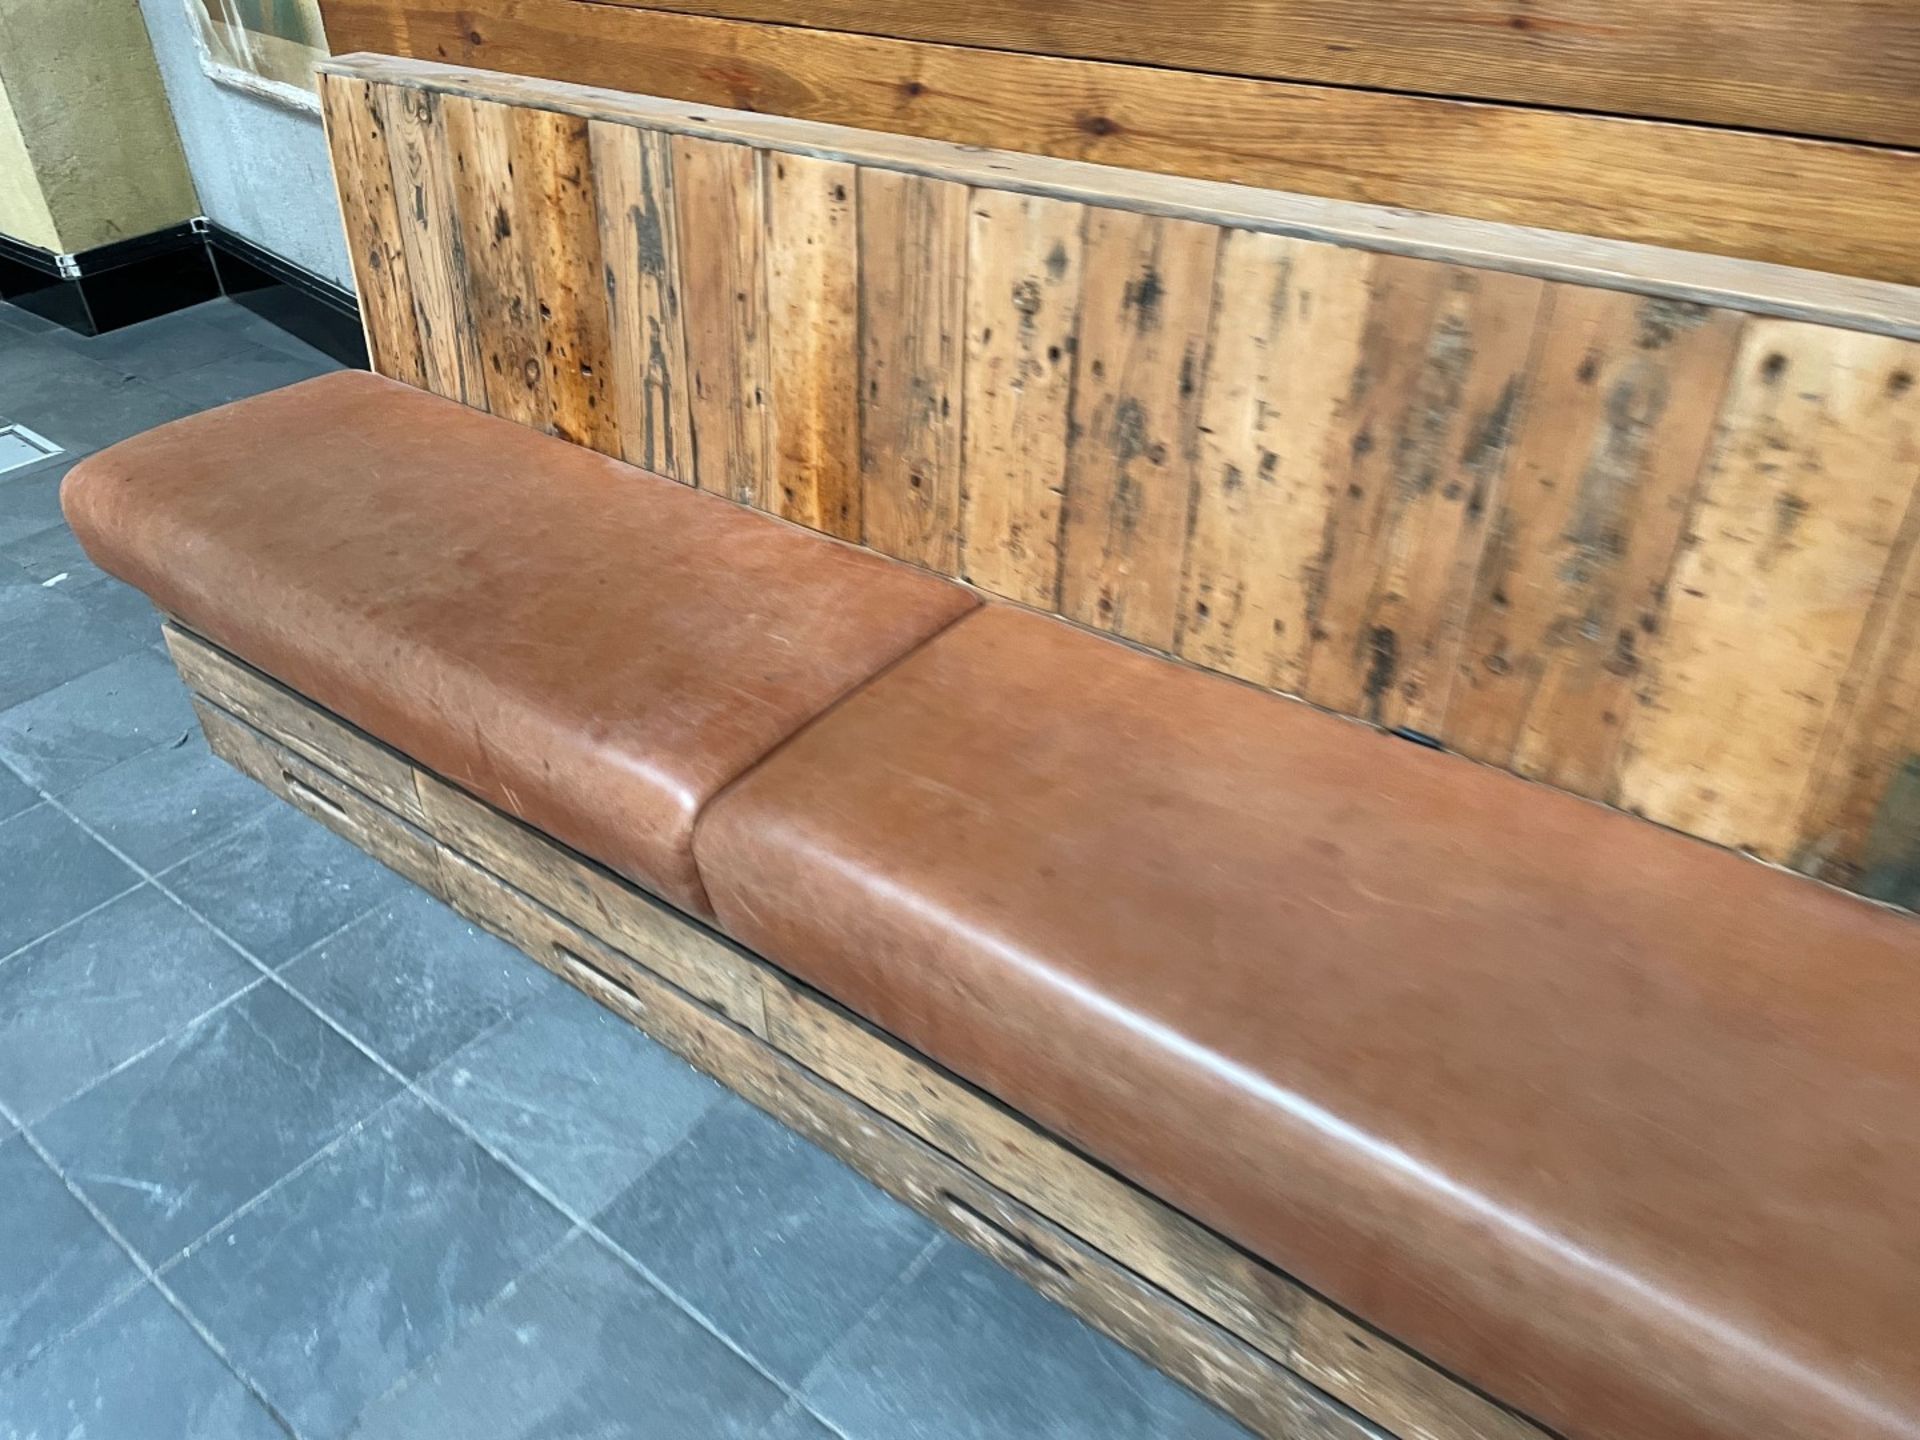 1 x Rustic Wooden Seating Bench Featuring Tan Leather Seat Pads - Suitable For Restaurants or Bars! - Image 5 of 12